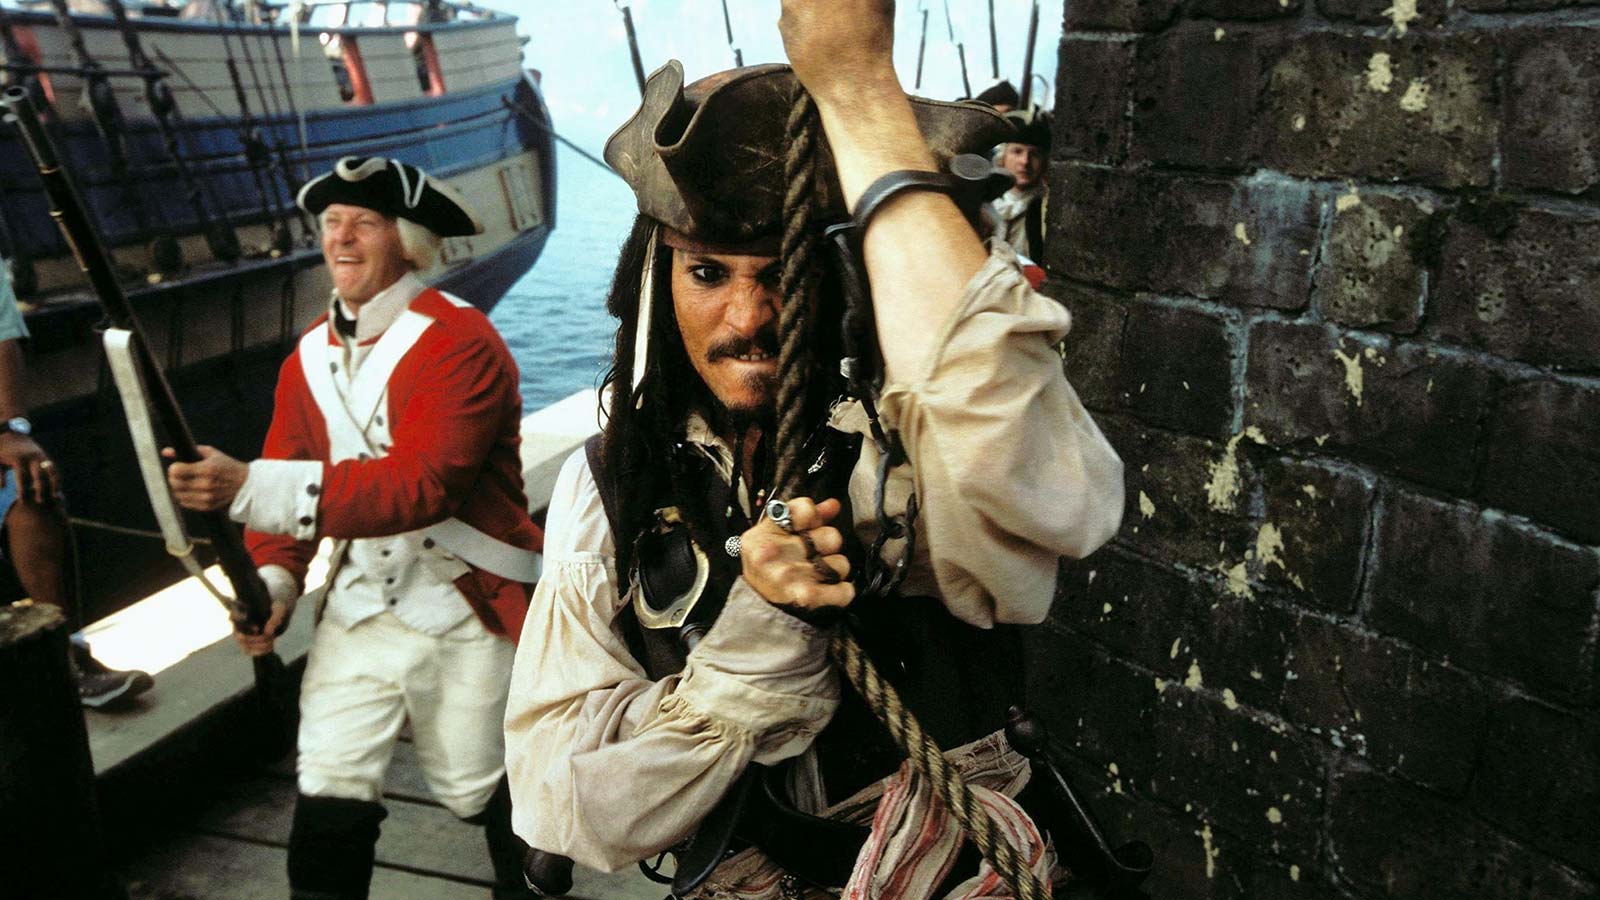 Pirates of the Caribbean with live orchestra: tickets to win